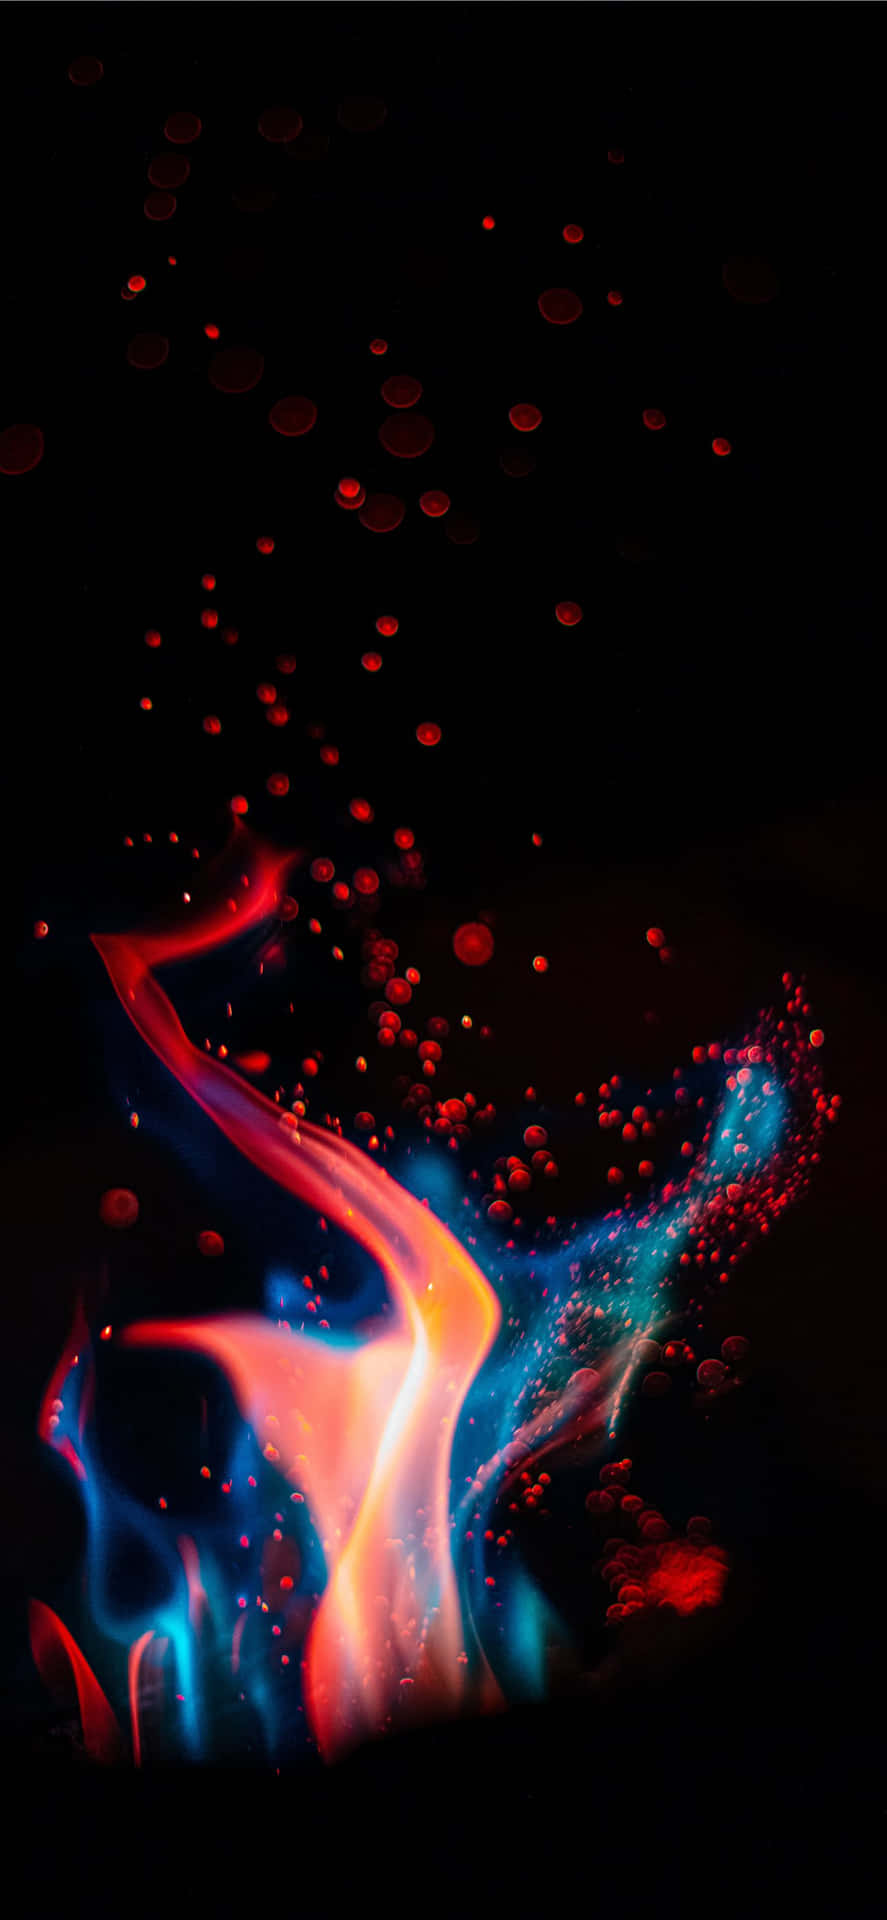 A beautiful mix of red and blue fire Wallpaper